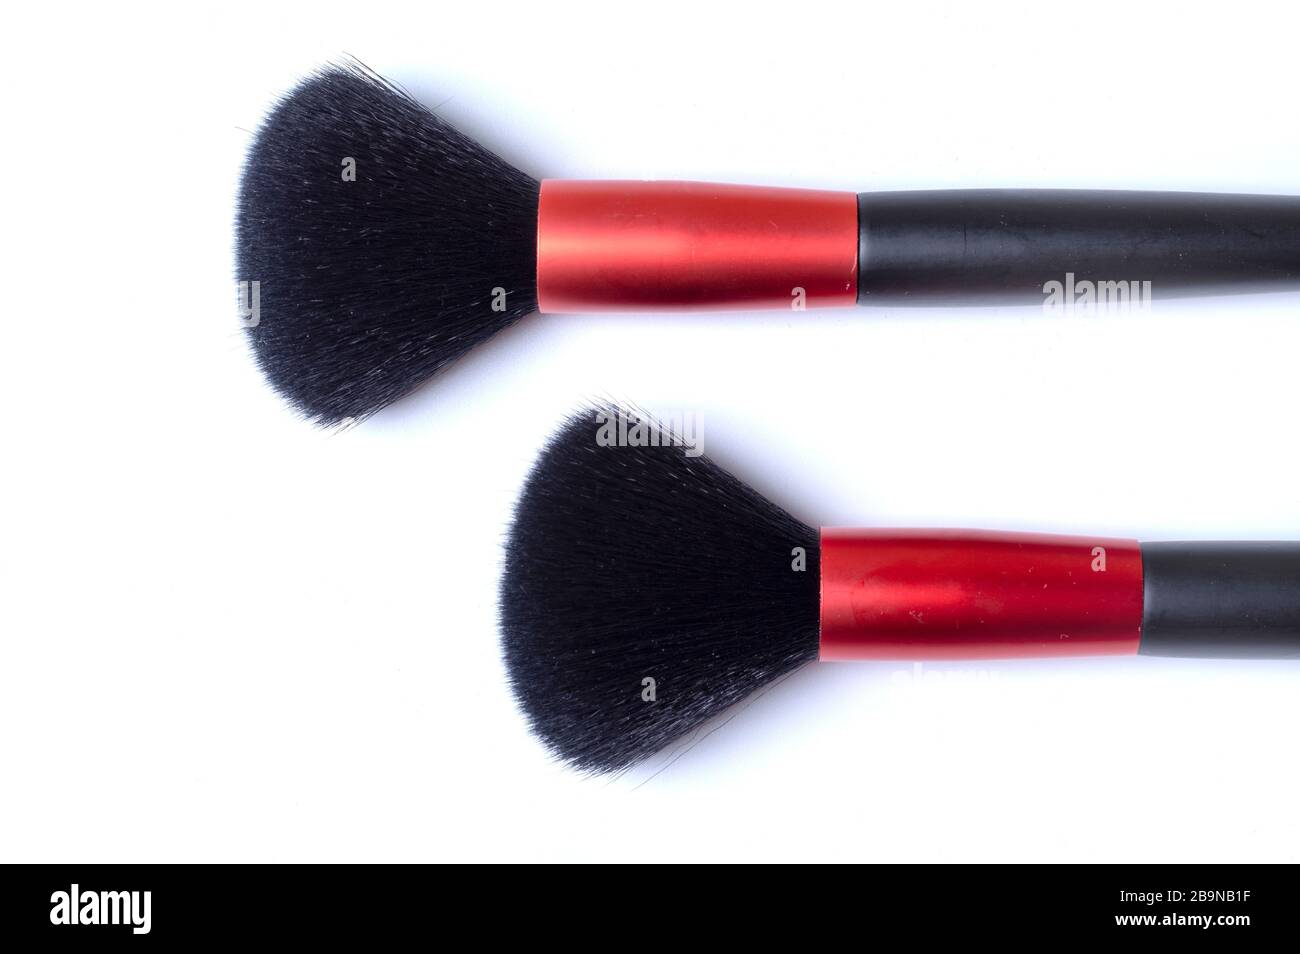 two makeup brushes on a white background, top view. Close-up photo. Stock Photo